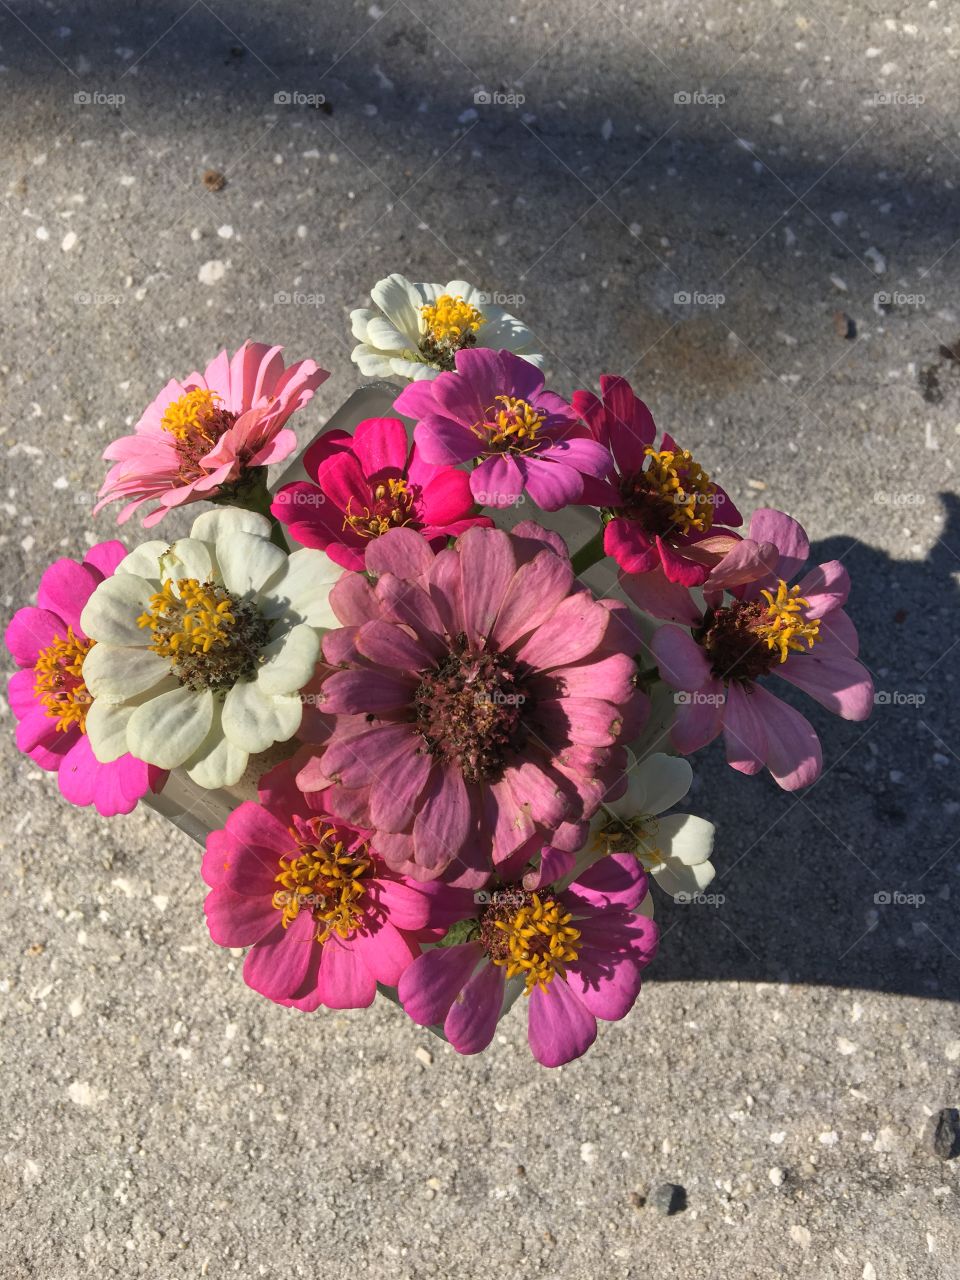 Radiant color of home grown Zinnia annual flowers bursting with color. Excellent centerpiece